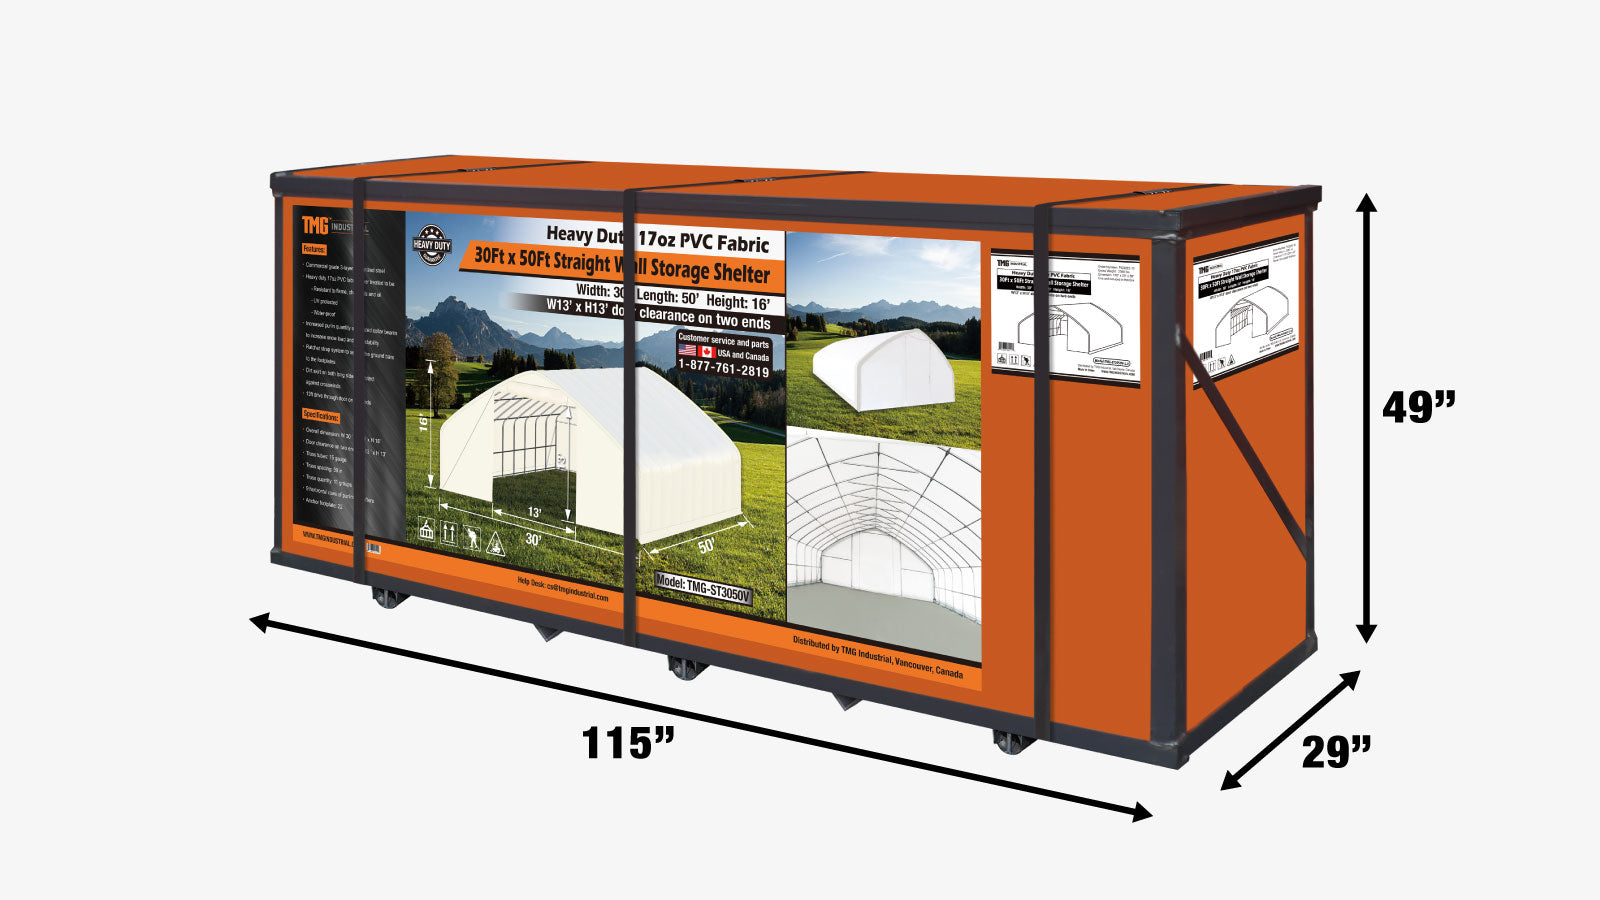 TMG Industrial 30' x 50' Straight Wall Peak Ceiling Storage Shelter with Heavy Duty 17 oz PVC Cover & Drive Through Doors, TMG-ST3050V-shipping-info-image